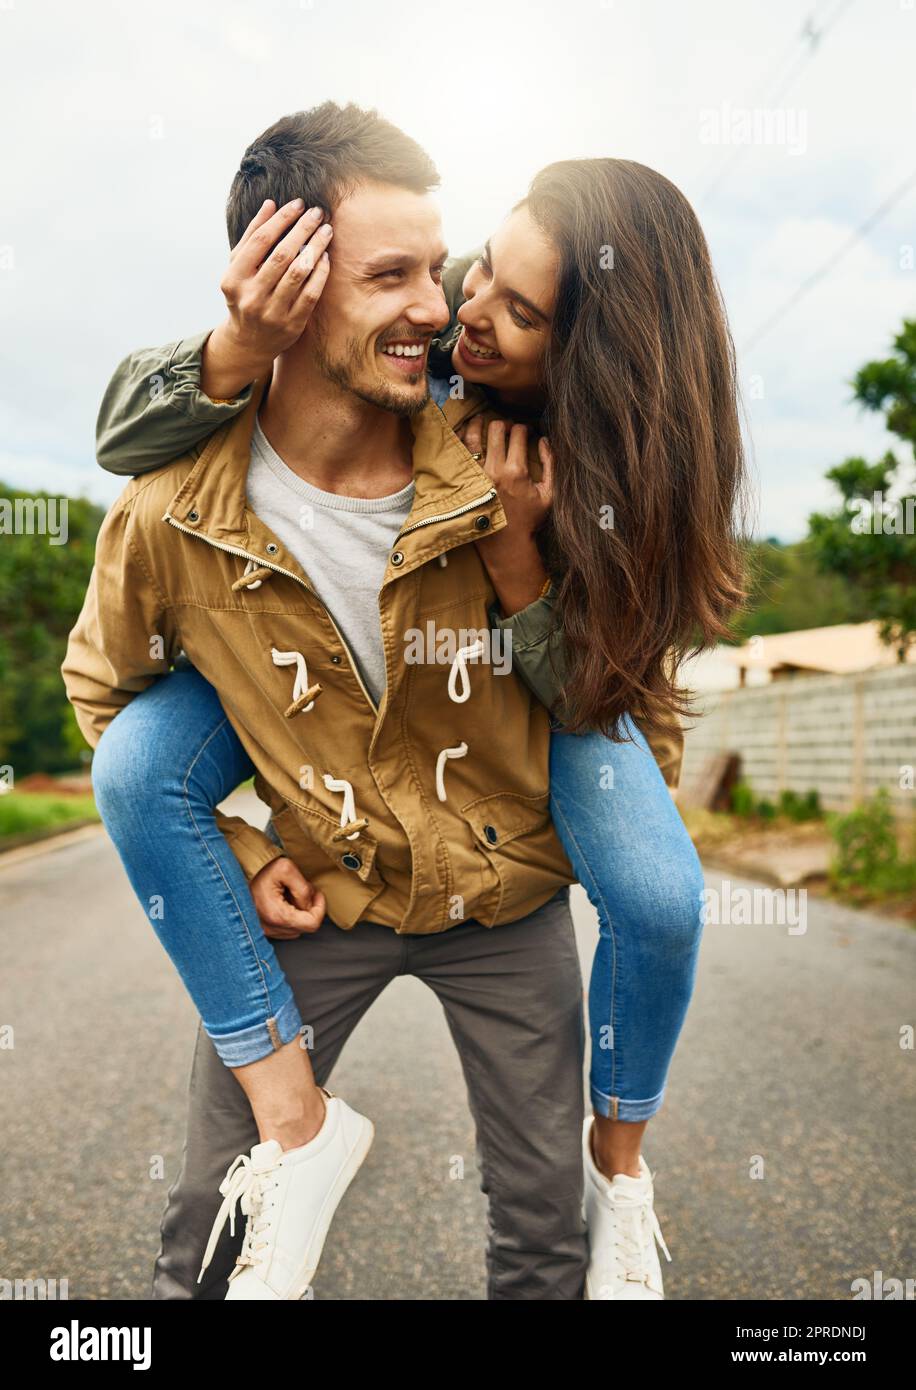 She my lover and my best friend. a playful couple spending the day outdoors. Stock Photo